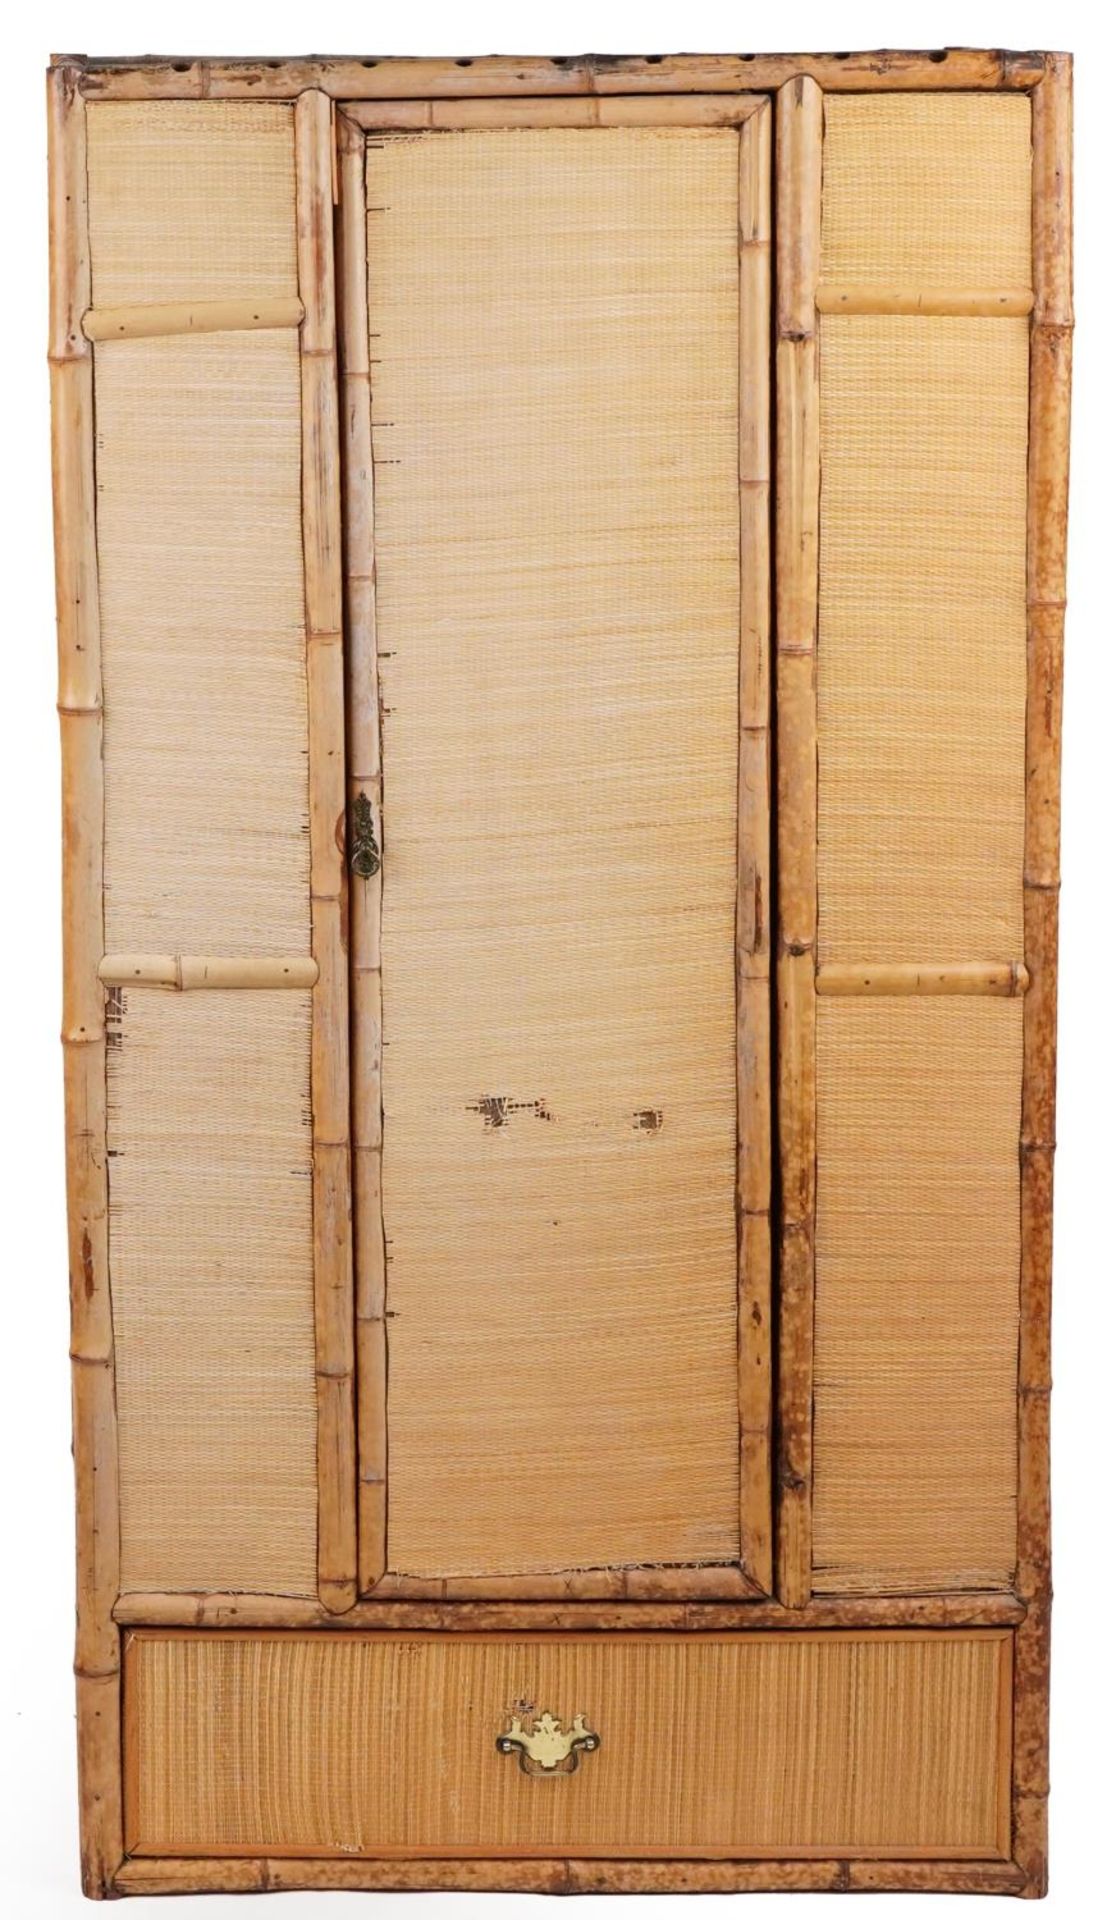 Victorian aesthetic bamboo and hessian style wardrobe with Japanned interior embossed C P - Image 2 of 5